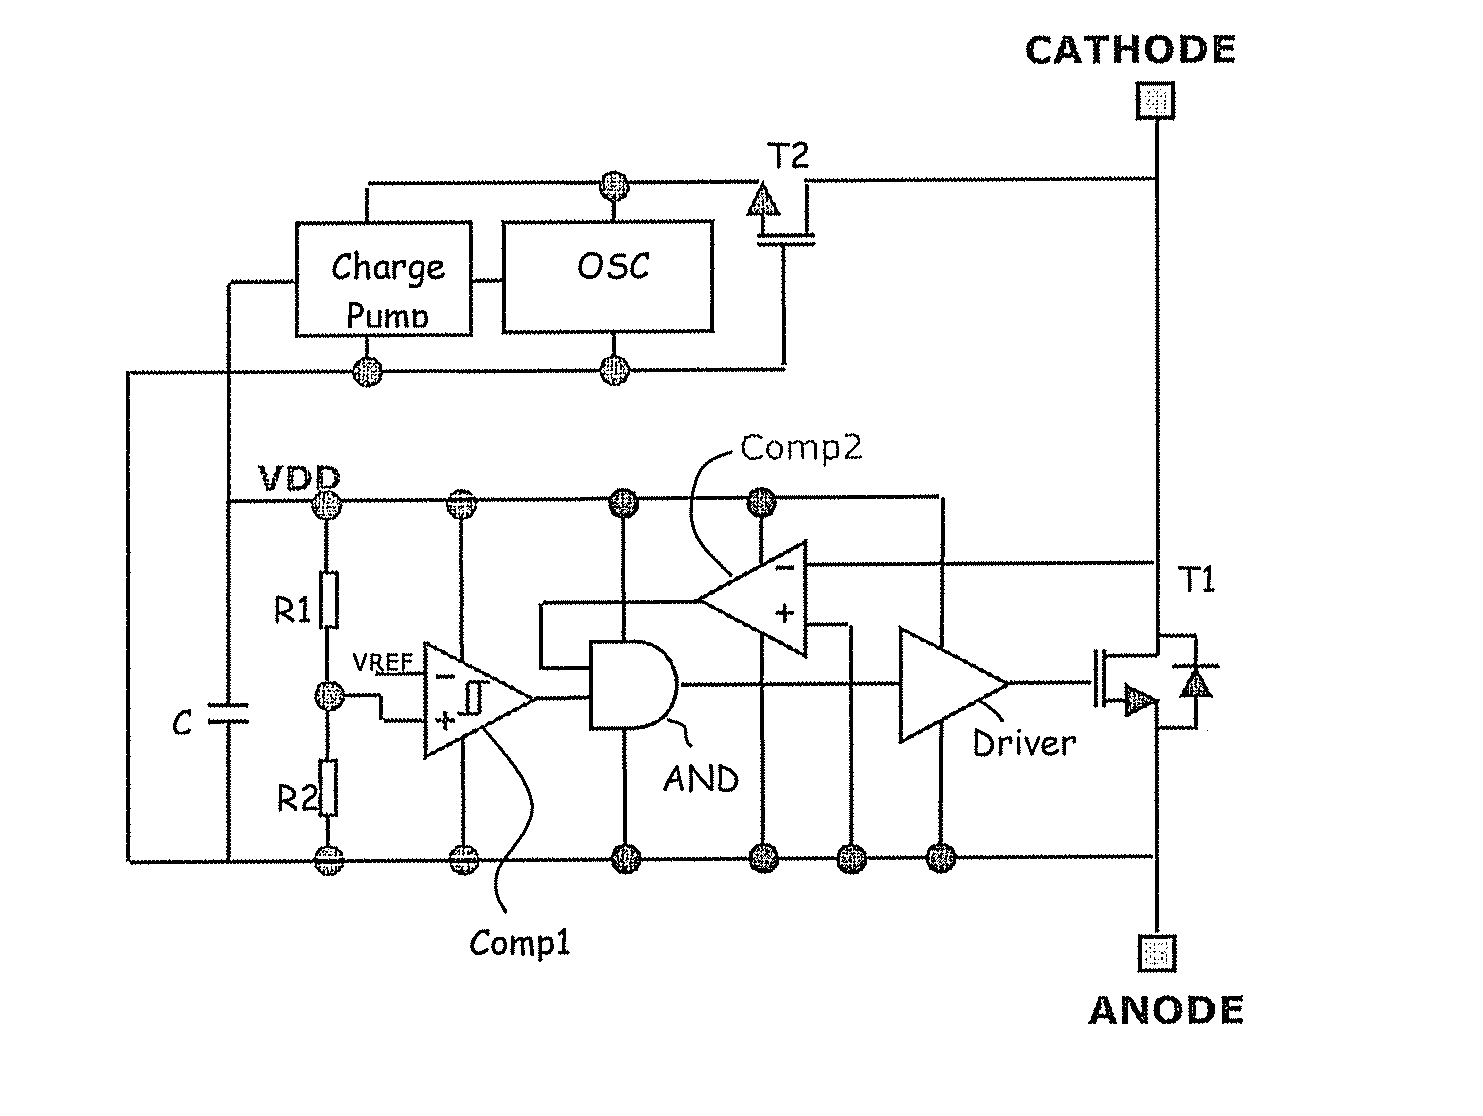 By-pass diode structure for strings of series connected cells of a photovoltaic panel